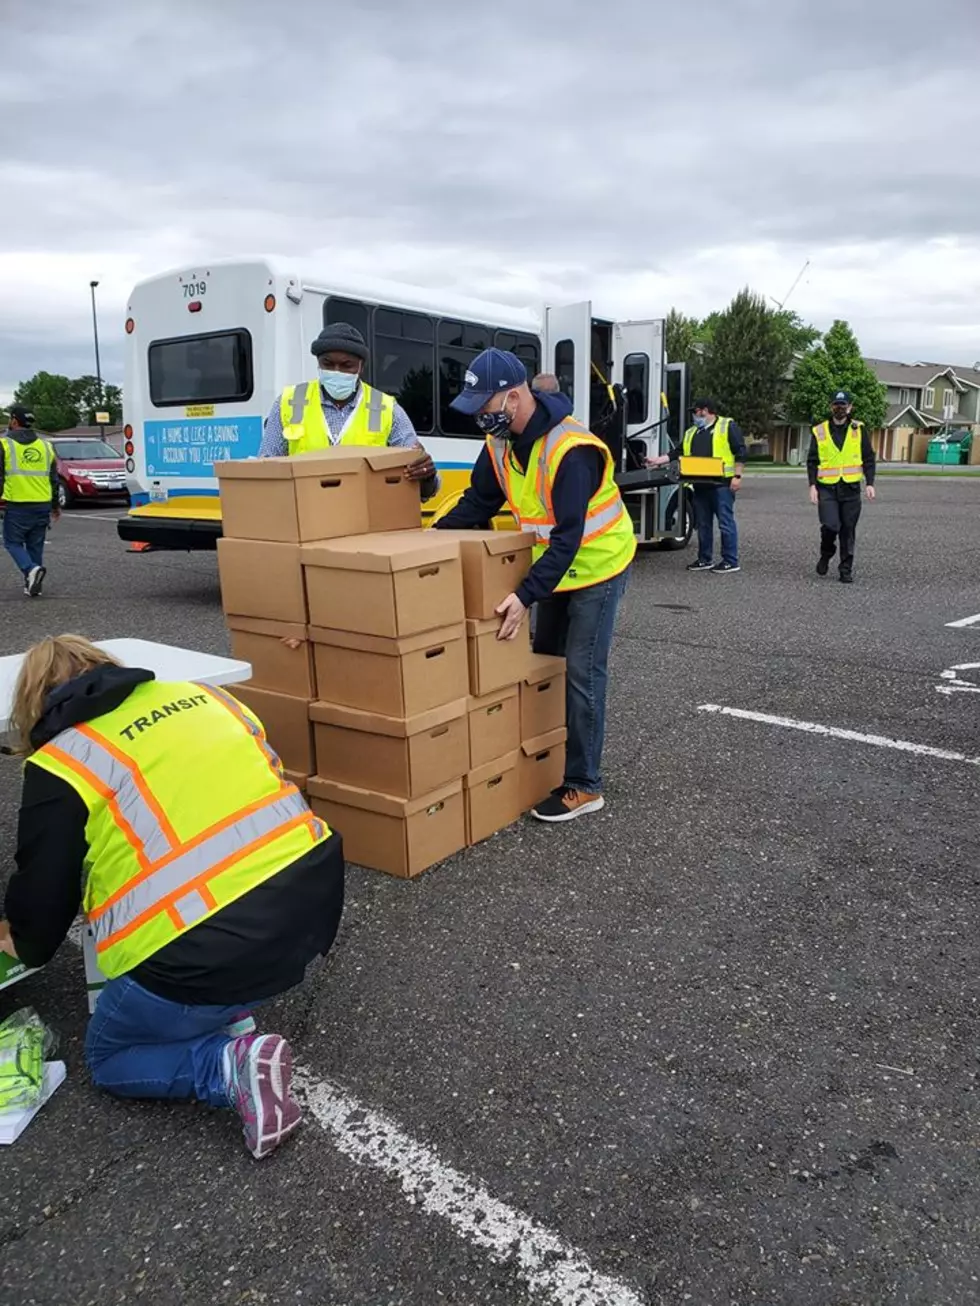 Huge Food Box Giveaway Event Planned Tomorrow in Tri-Cities &#038; Prosser